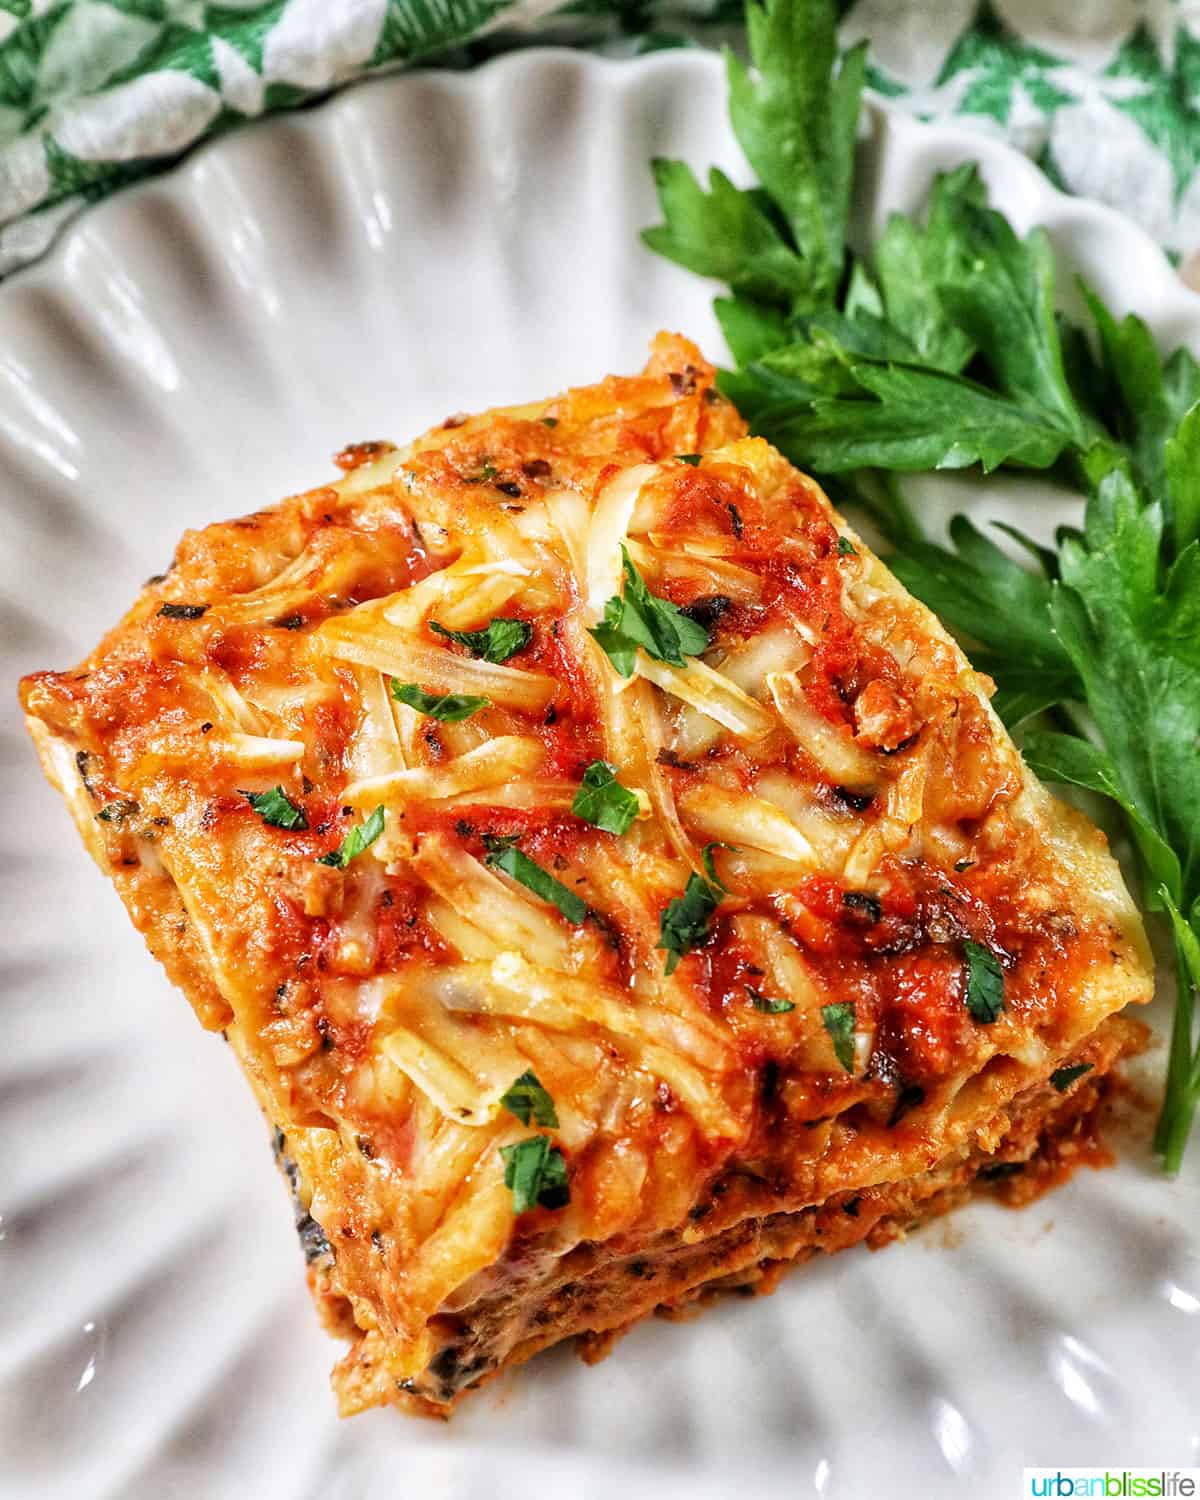 top view of multi-layered dairy free lasagna on a white plate with parsley on the side.